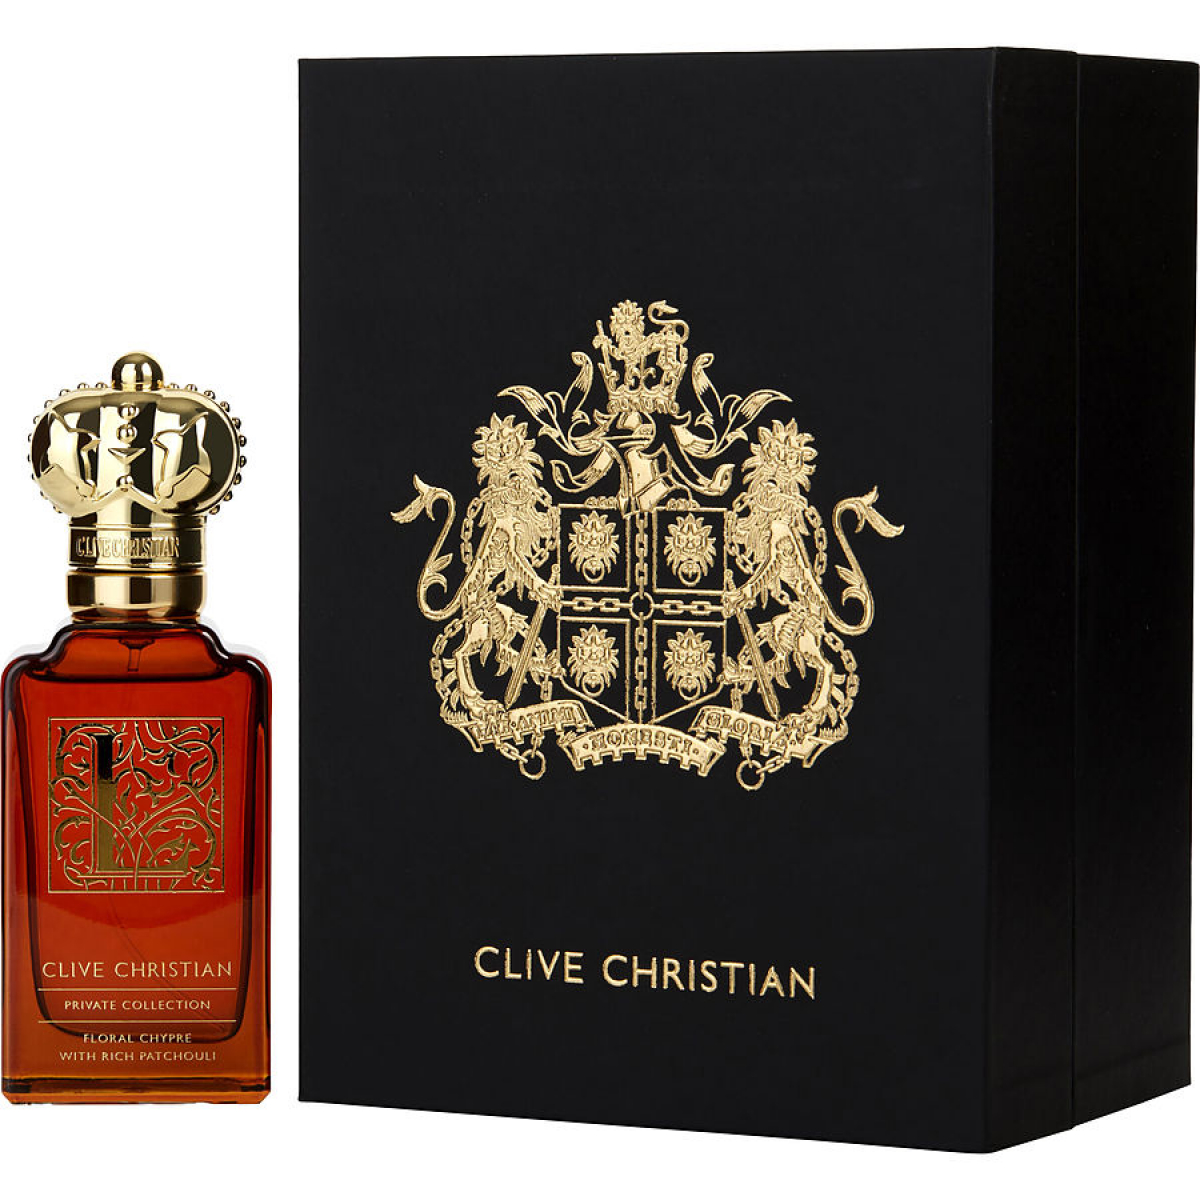 Клиф кристиан. Клайв Кристиан духи. Clive Christian l for women Floral Chypre with Rich Patchouli. Clive Christian l: Floral Chypre woman. Chypre Floral духи.